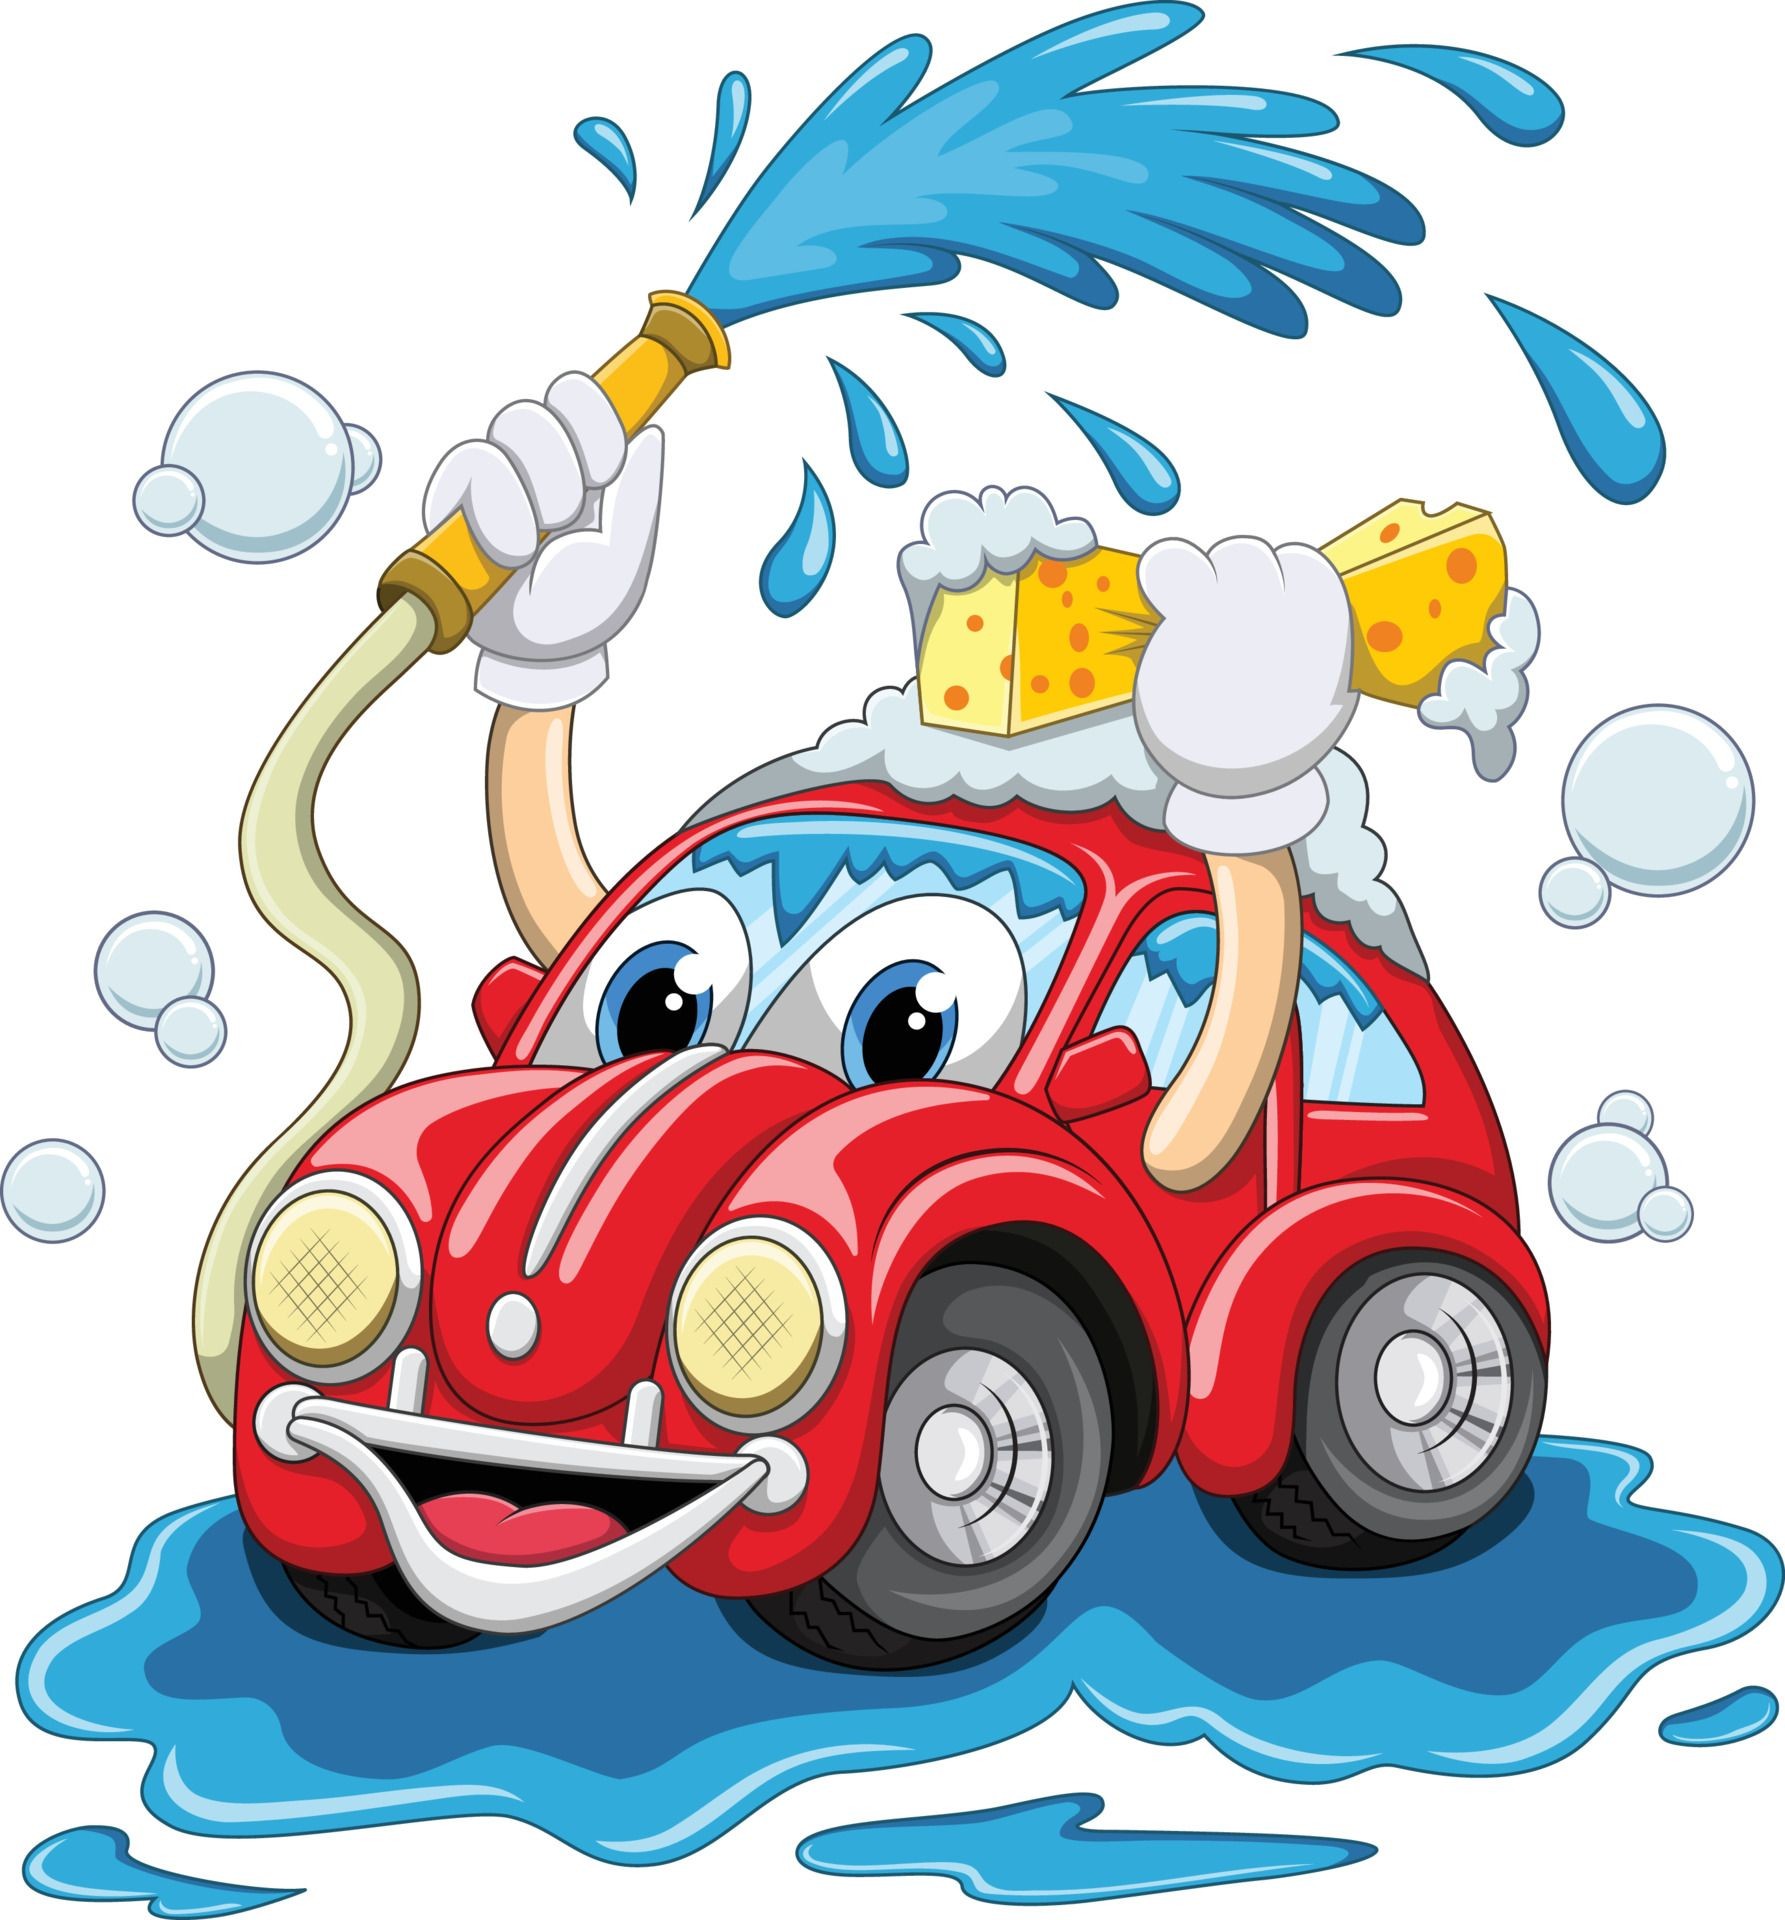 Cartoon Red Love Bug Type Car holding a sponge and hose while washing its own car